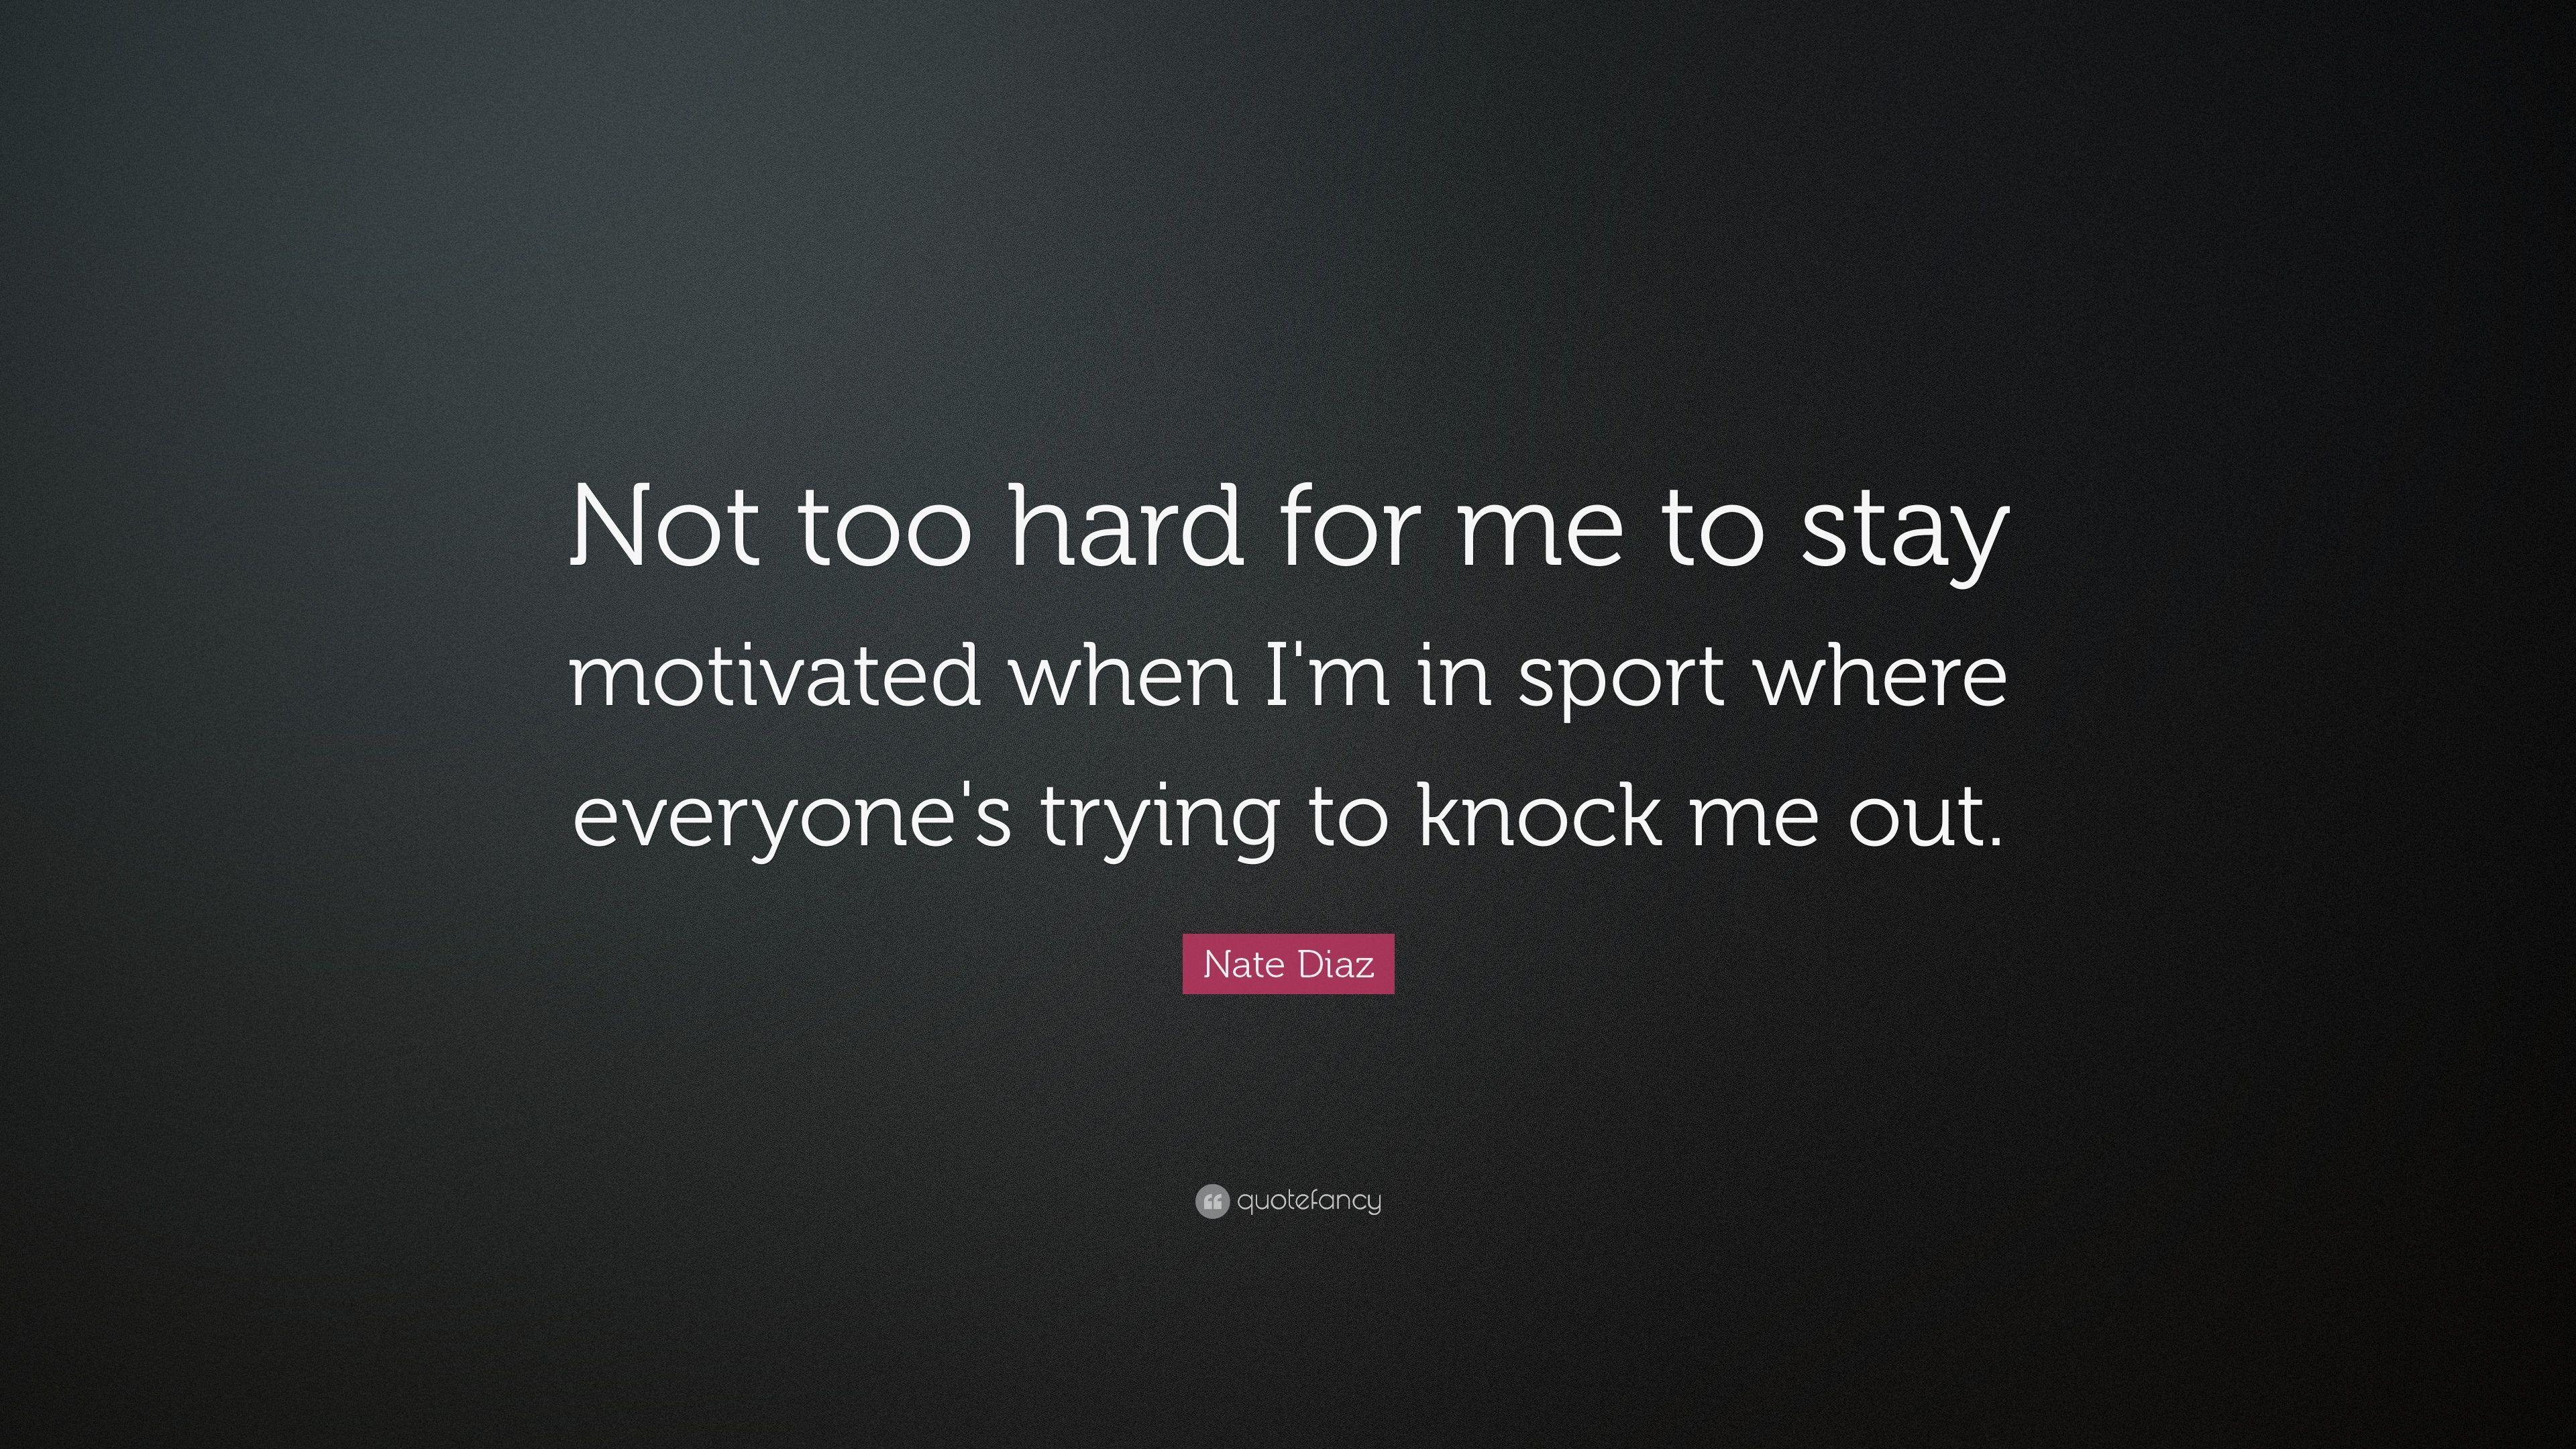 Nate Diaz Quote: “Not too hard for me to stay motivated when I'm